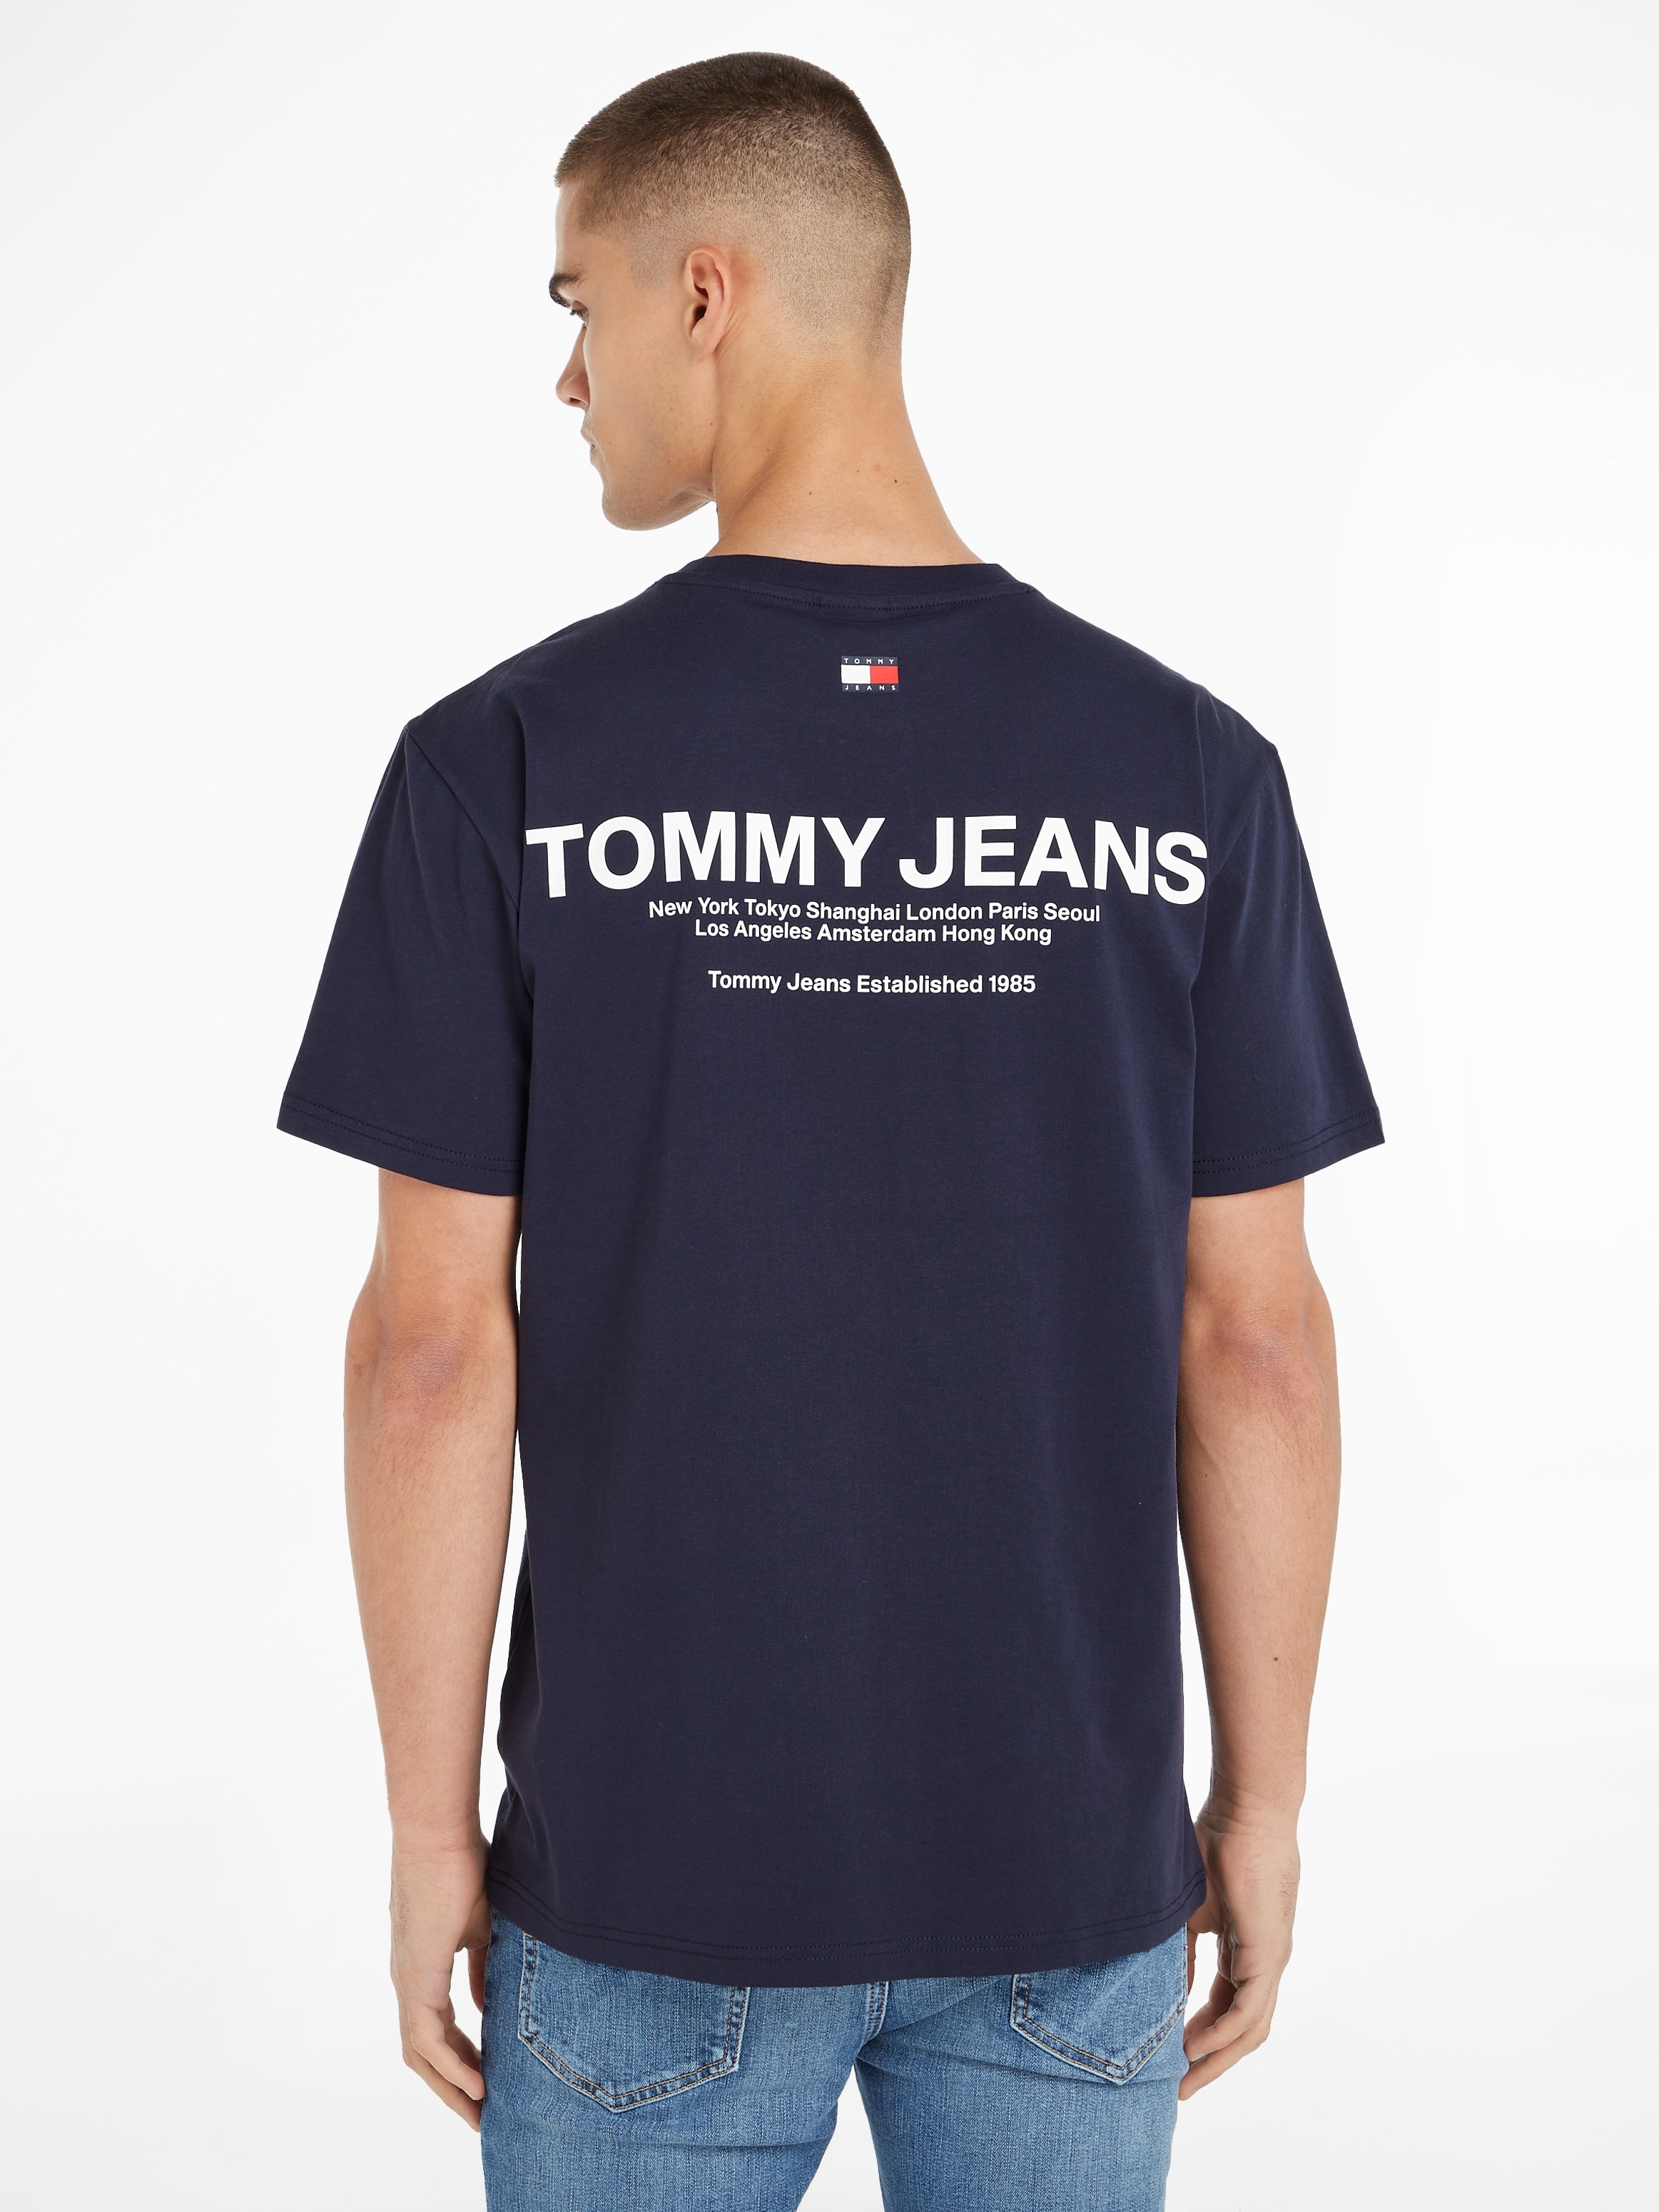 Tommy Jeans bei T-Shirt »TJM online LINEAR OTTO CLSC kaufen TEE« BACK PRINT